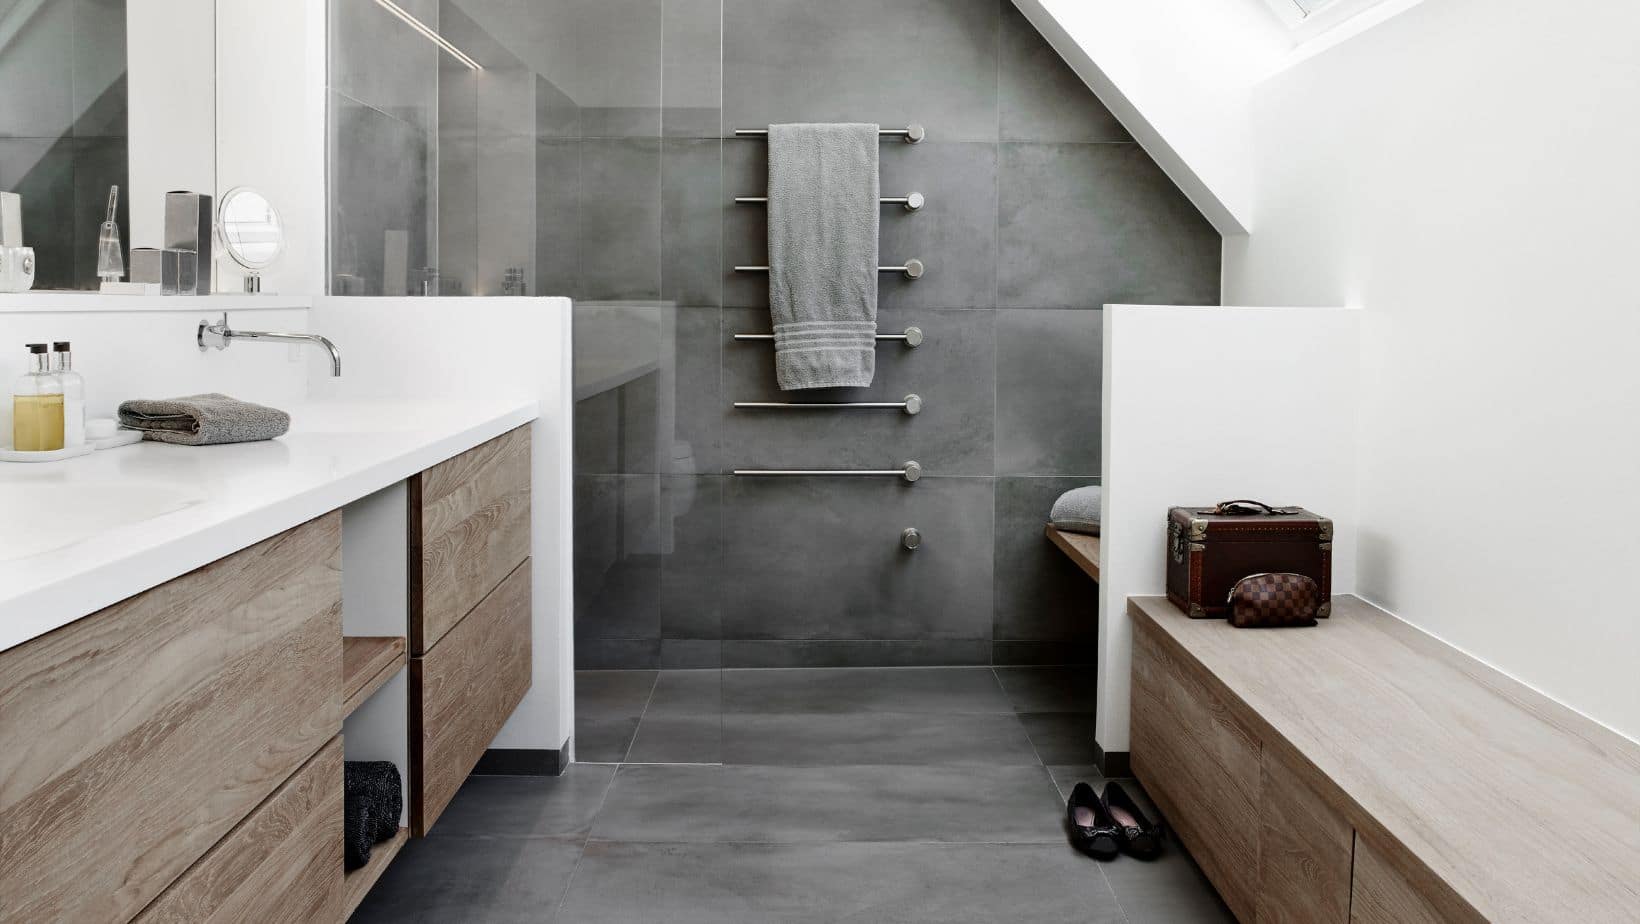 Grey modern style bathroom with wood cabinet, bench, and walk-in shower